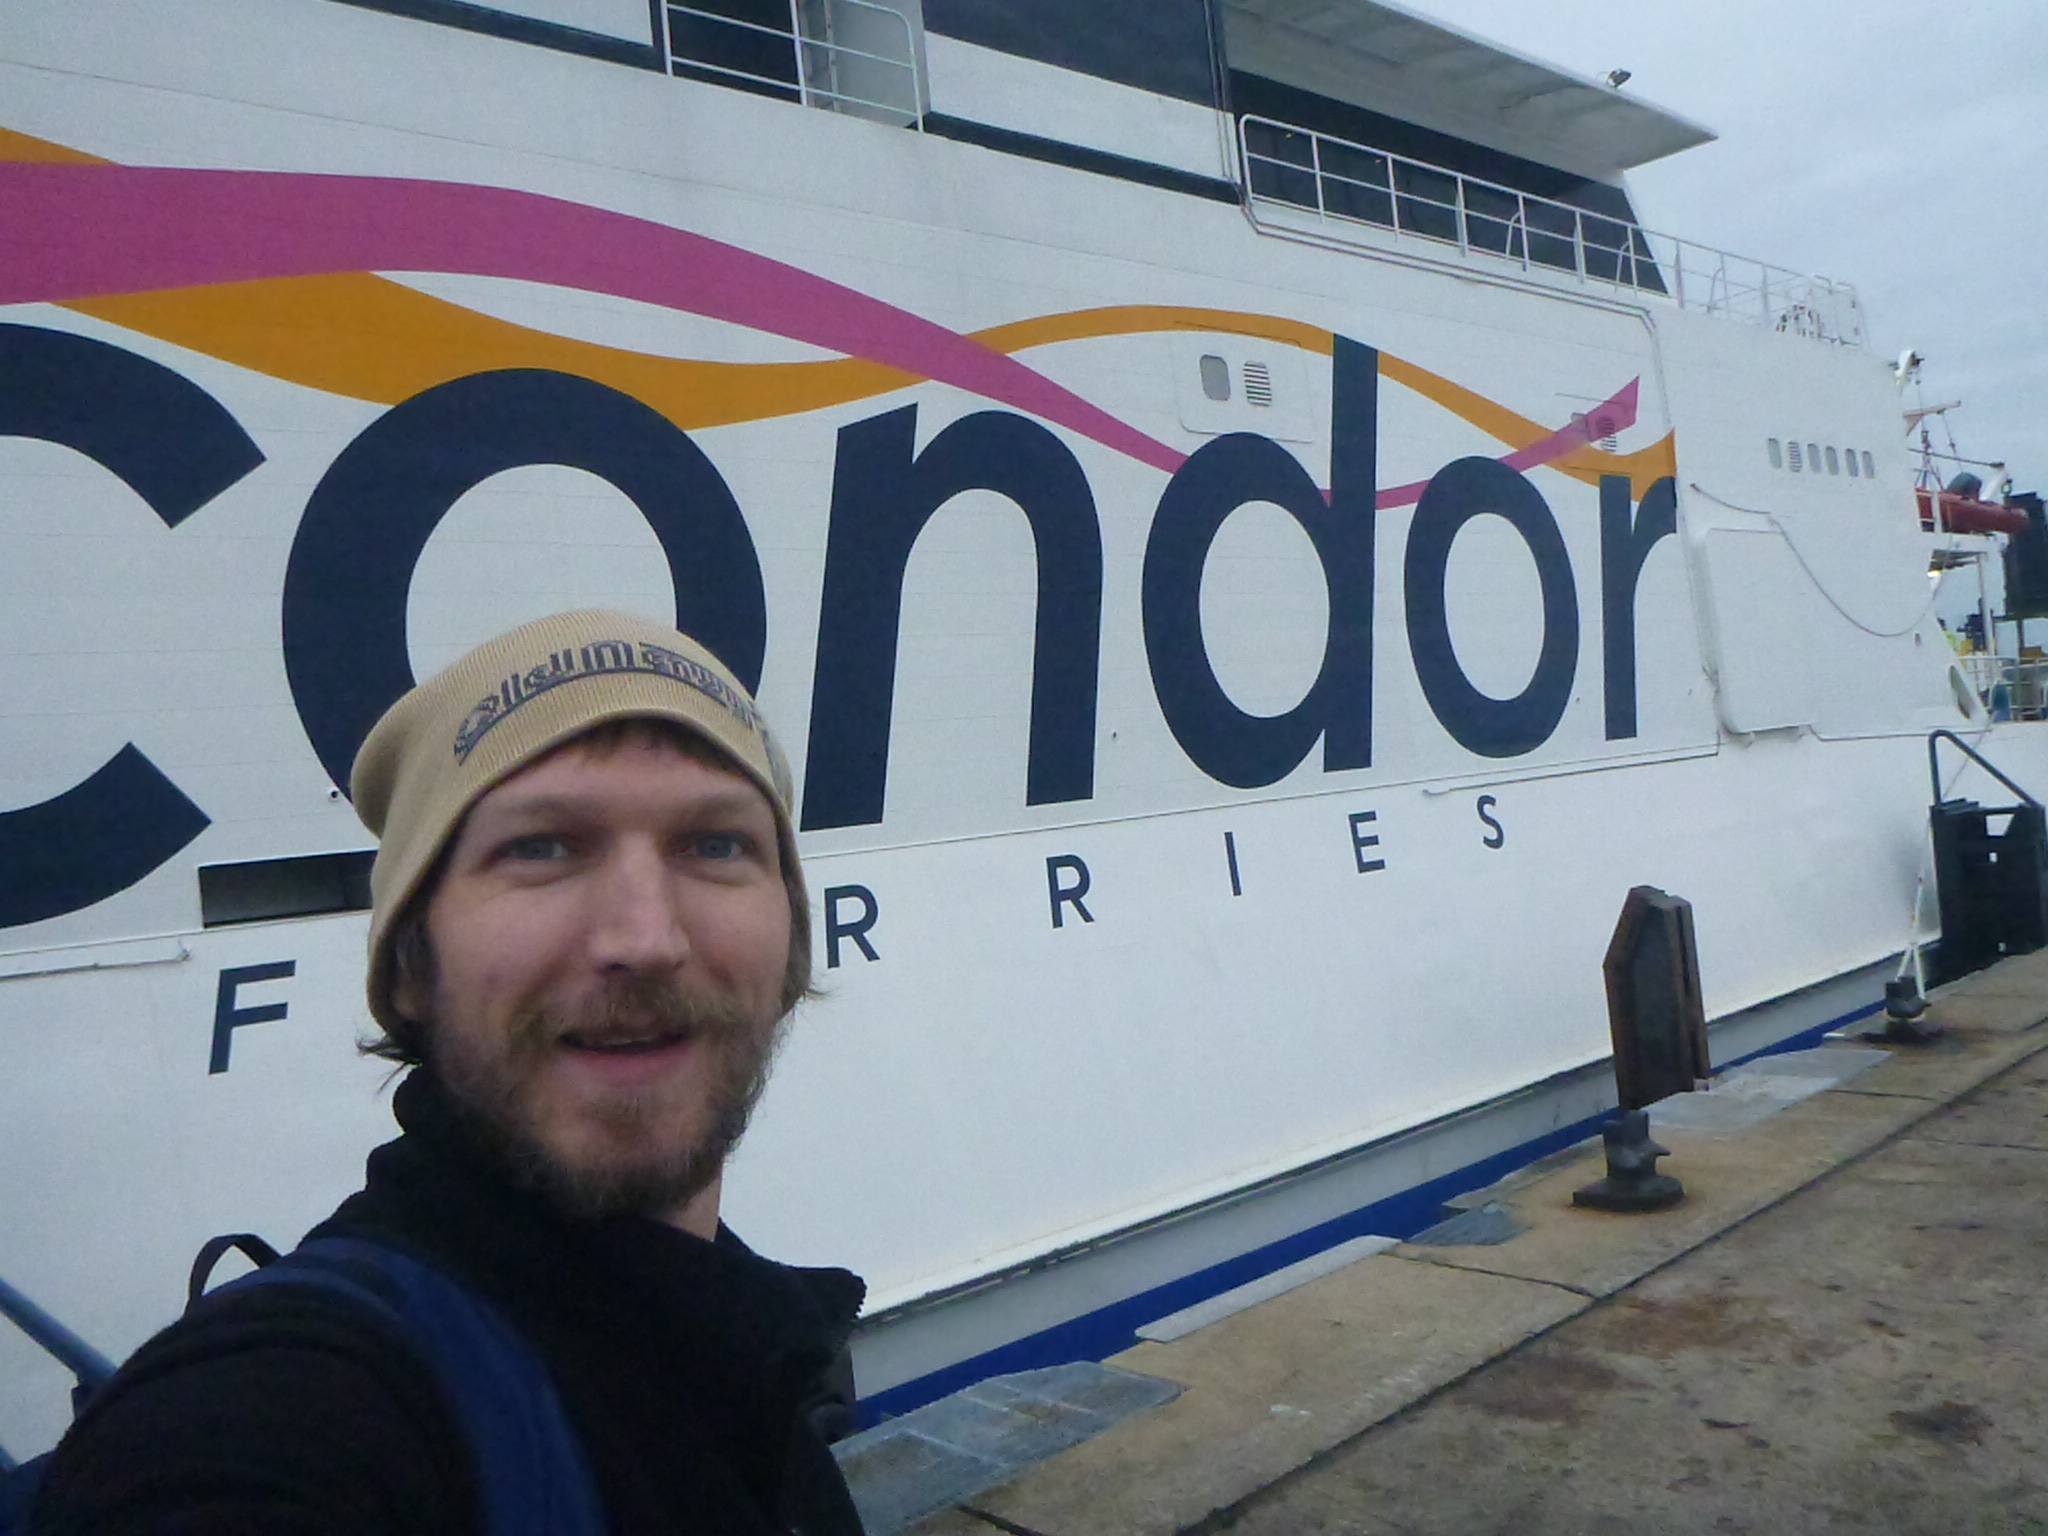 World Borders: The Ferry from Poole, England to St. Helier, Jersey